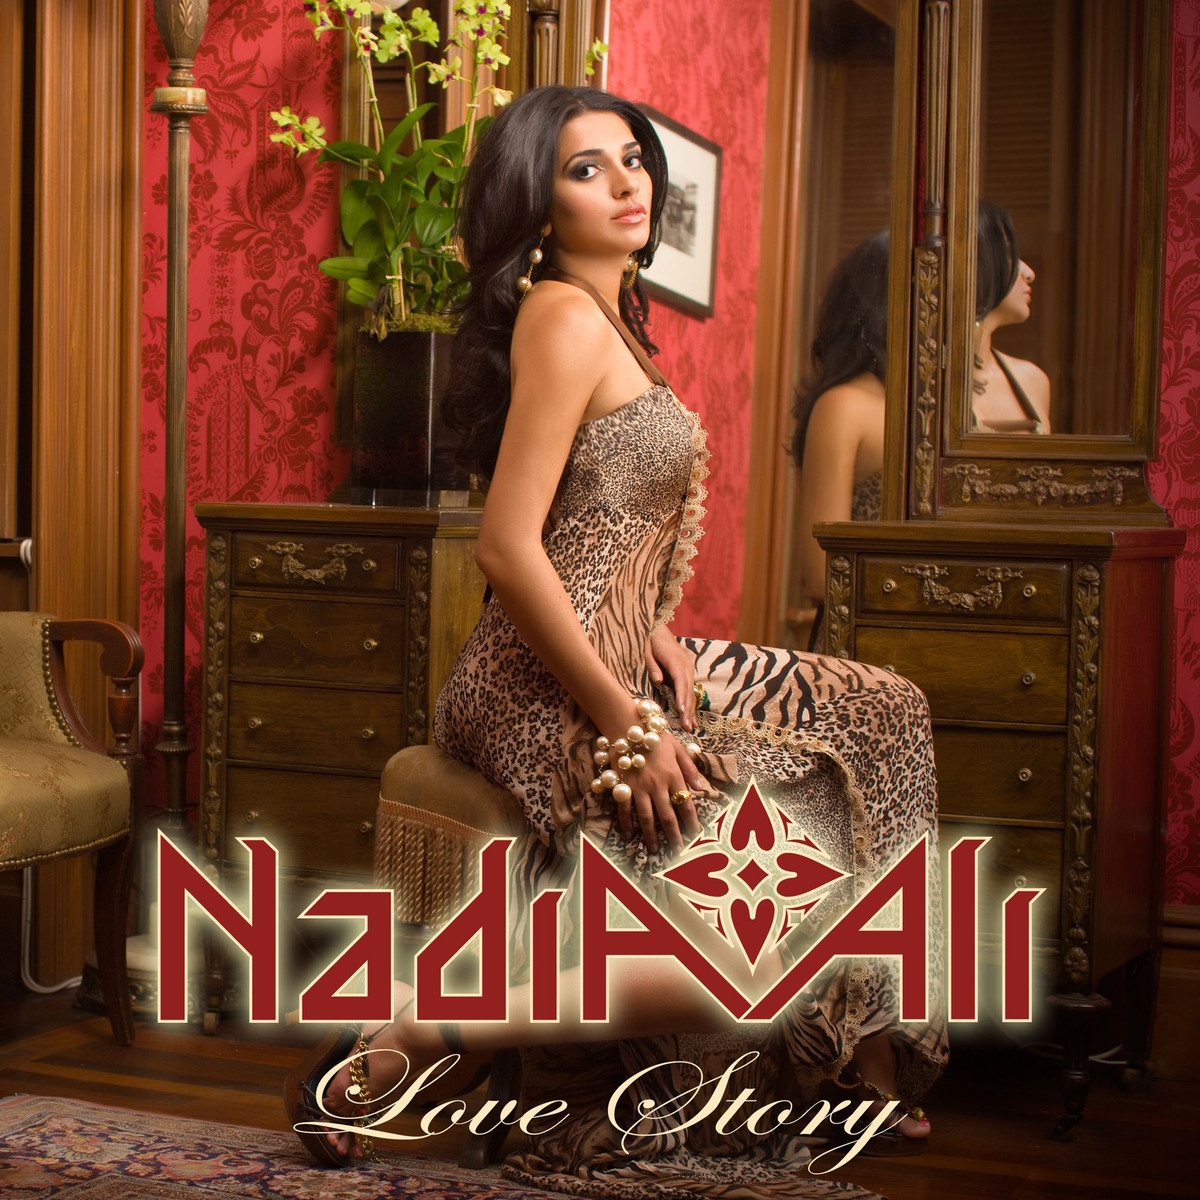 Love Story (Sultan & Ned Shepard Remix)